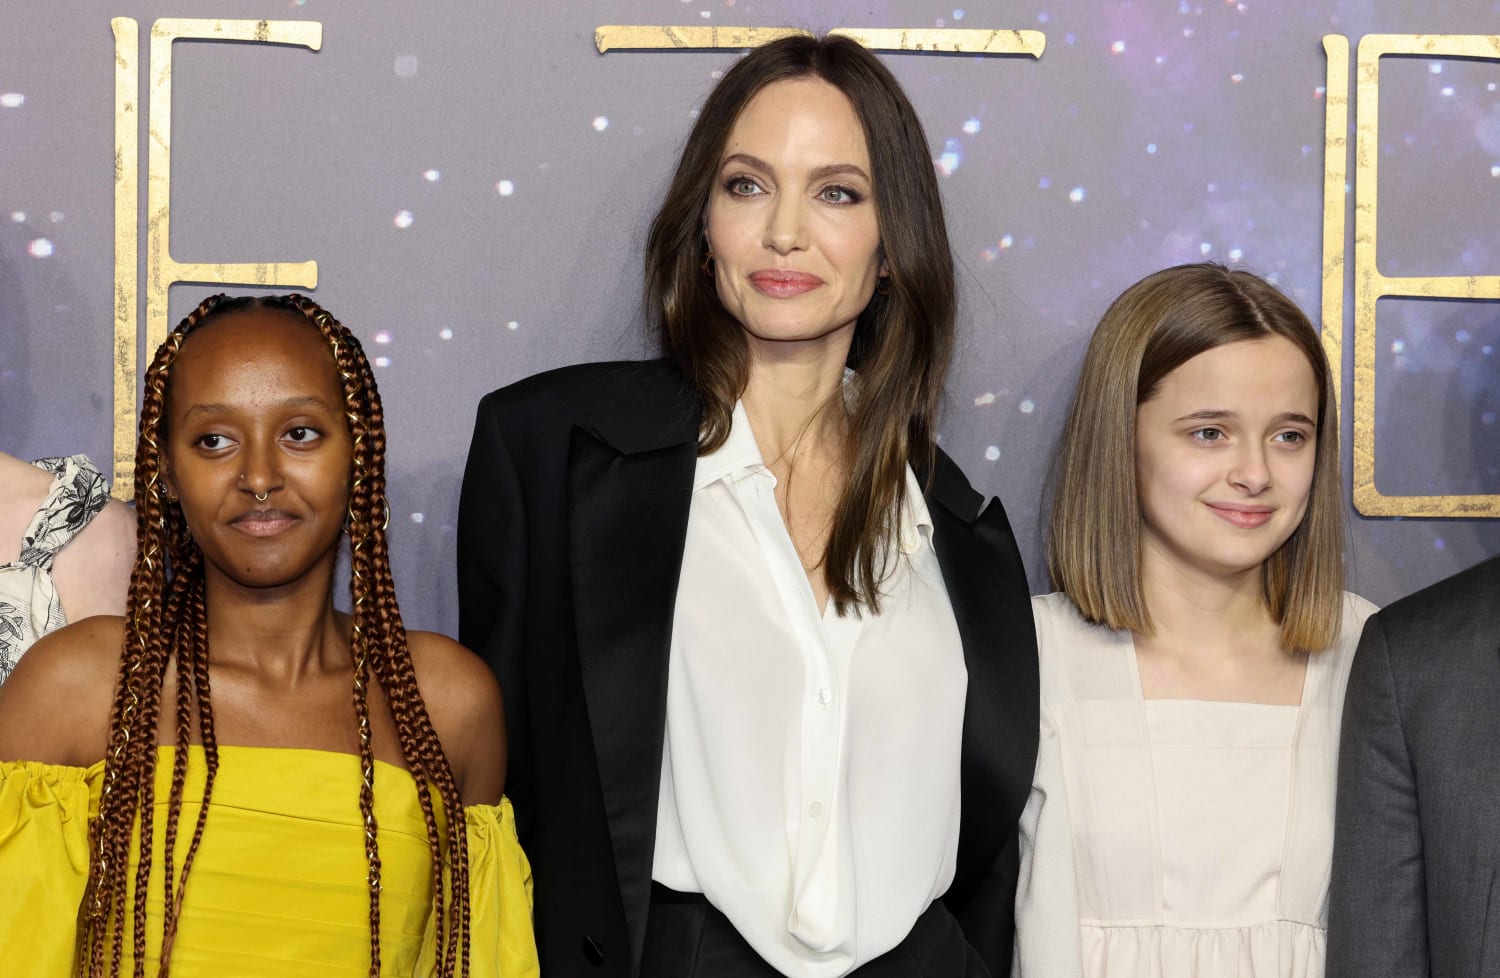 Angelina Jolie and Brad Pitt's 15-year-old daughter Vivienne makes rare appearance with her mom